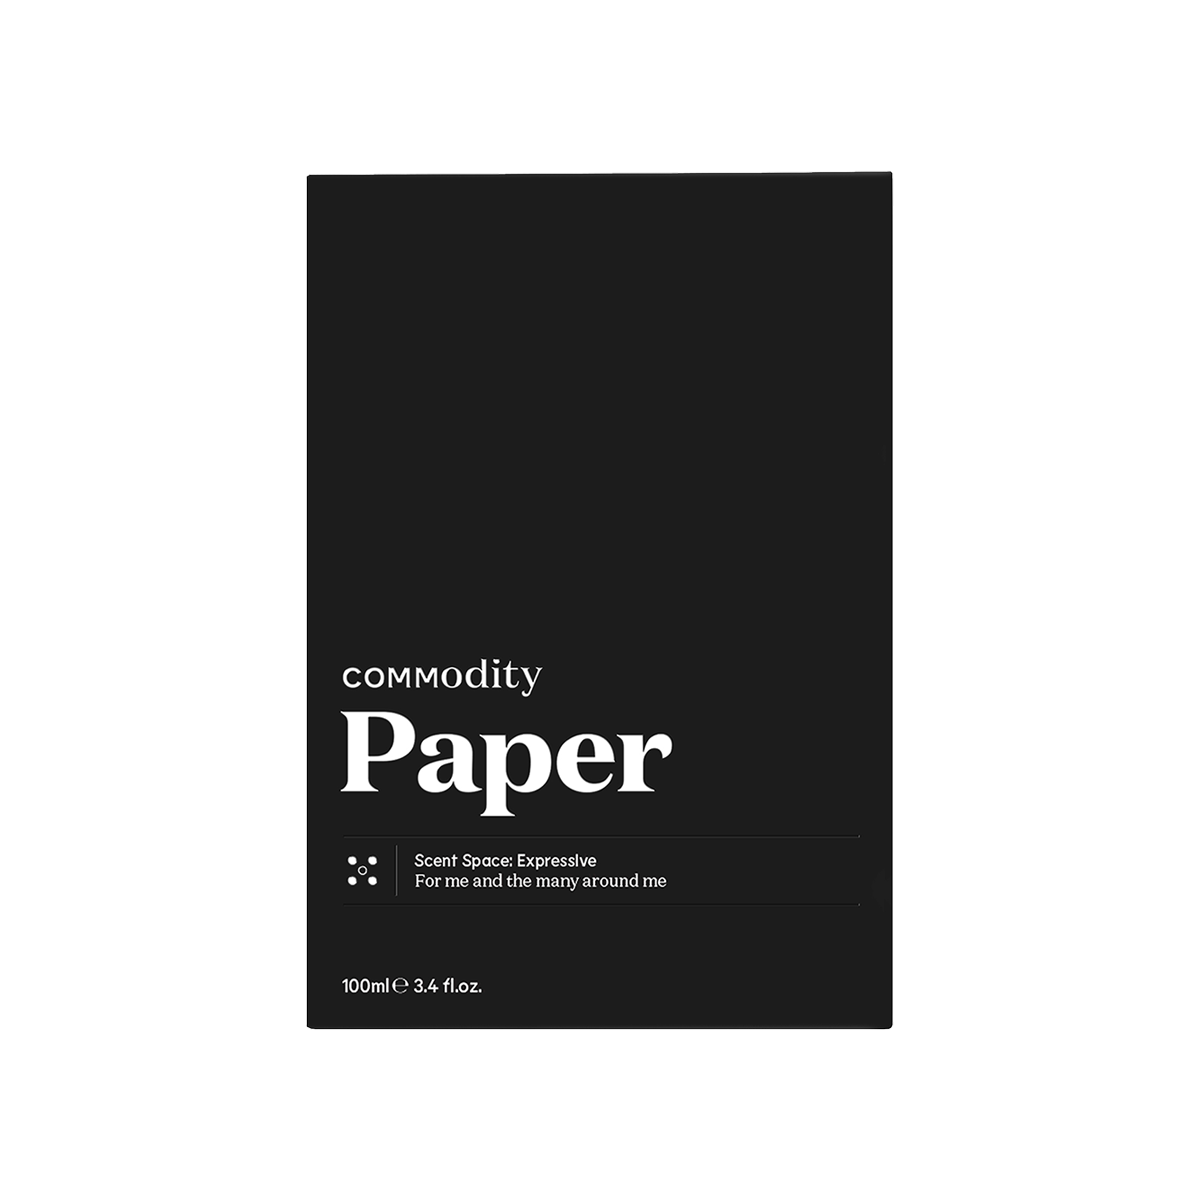 Commodity - Paper Expressive